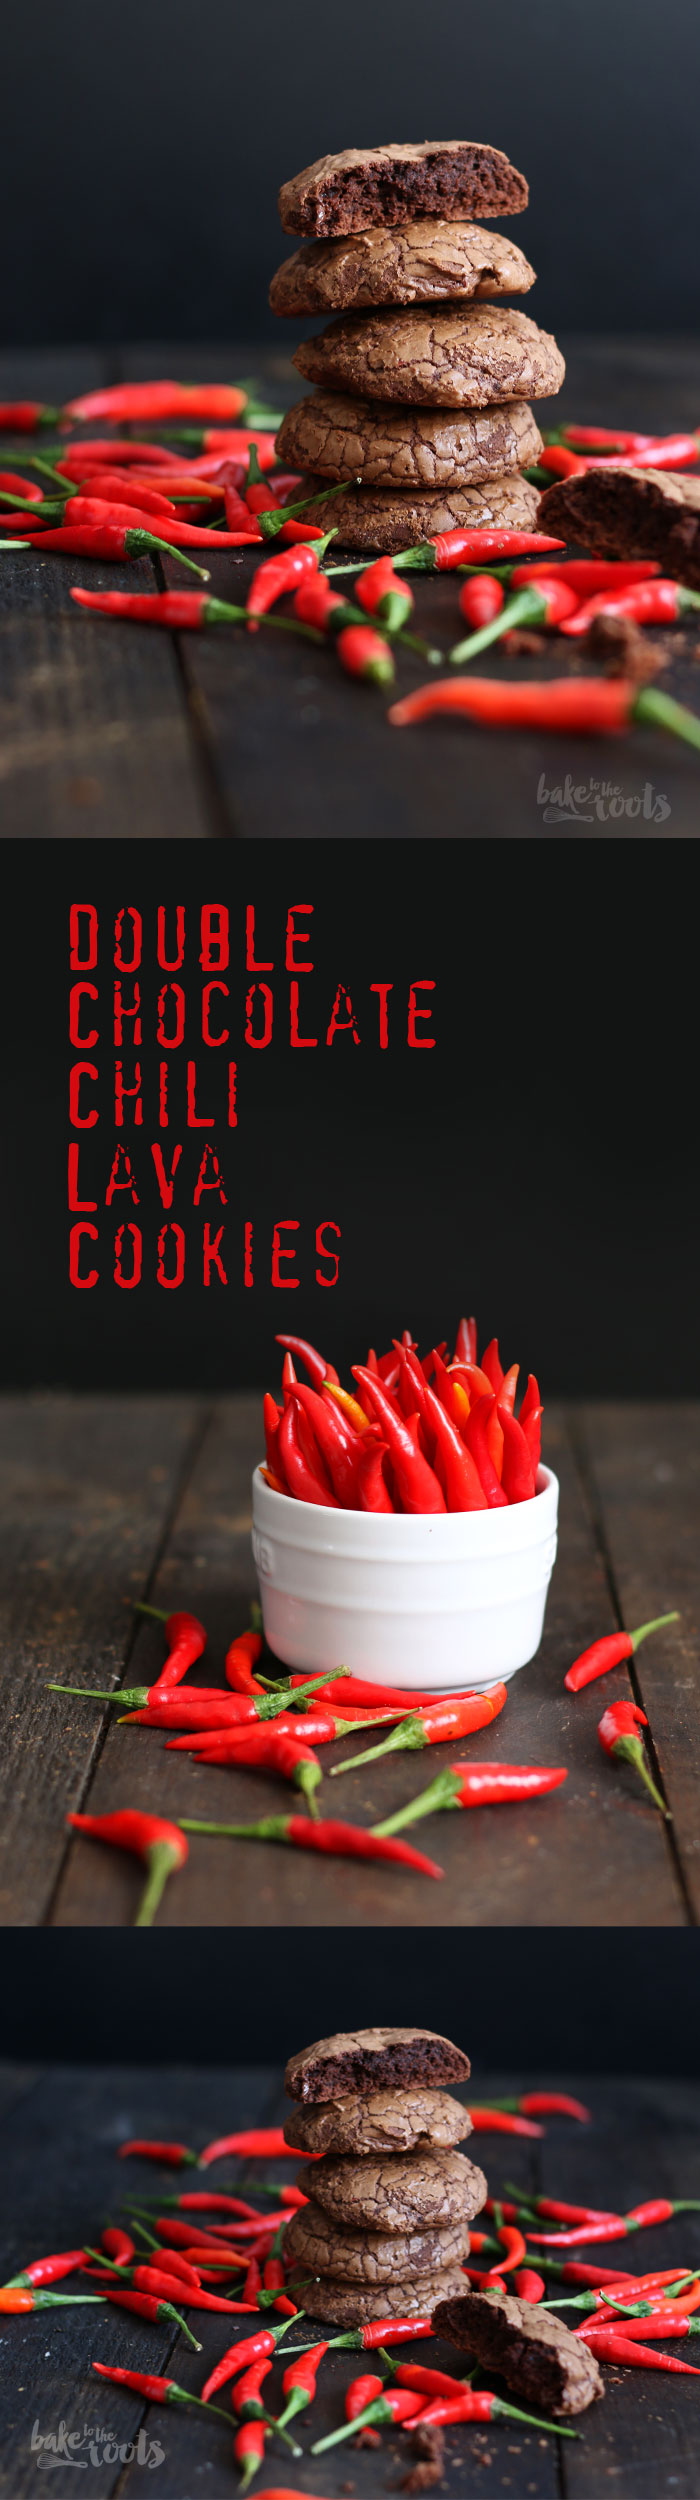 Double Chocolate Chili Lava Cookies | Bake to the roots | Bake to the roots